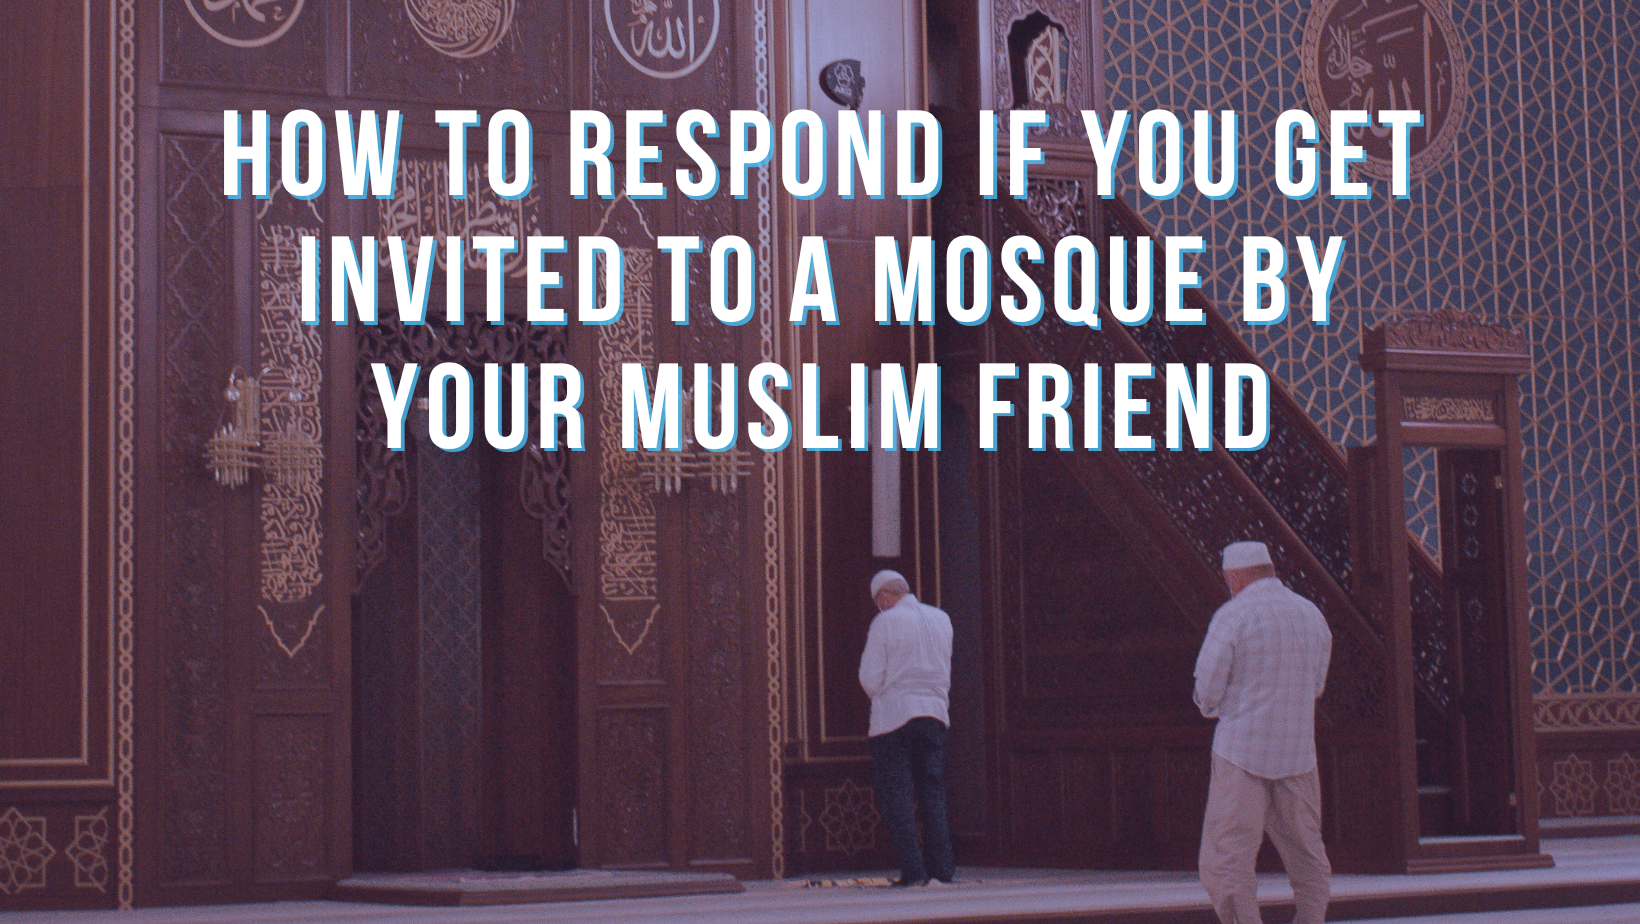 How to respond if you get invited to a mosque by your Muslim friend